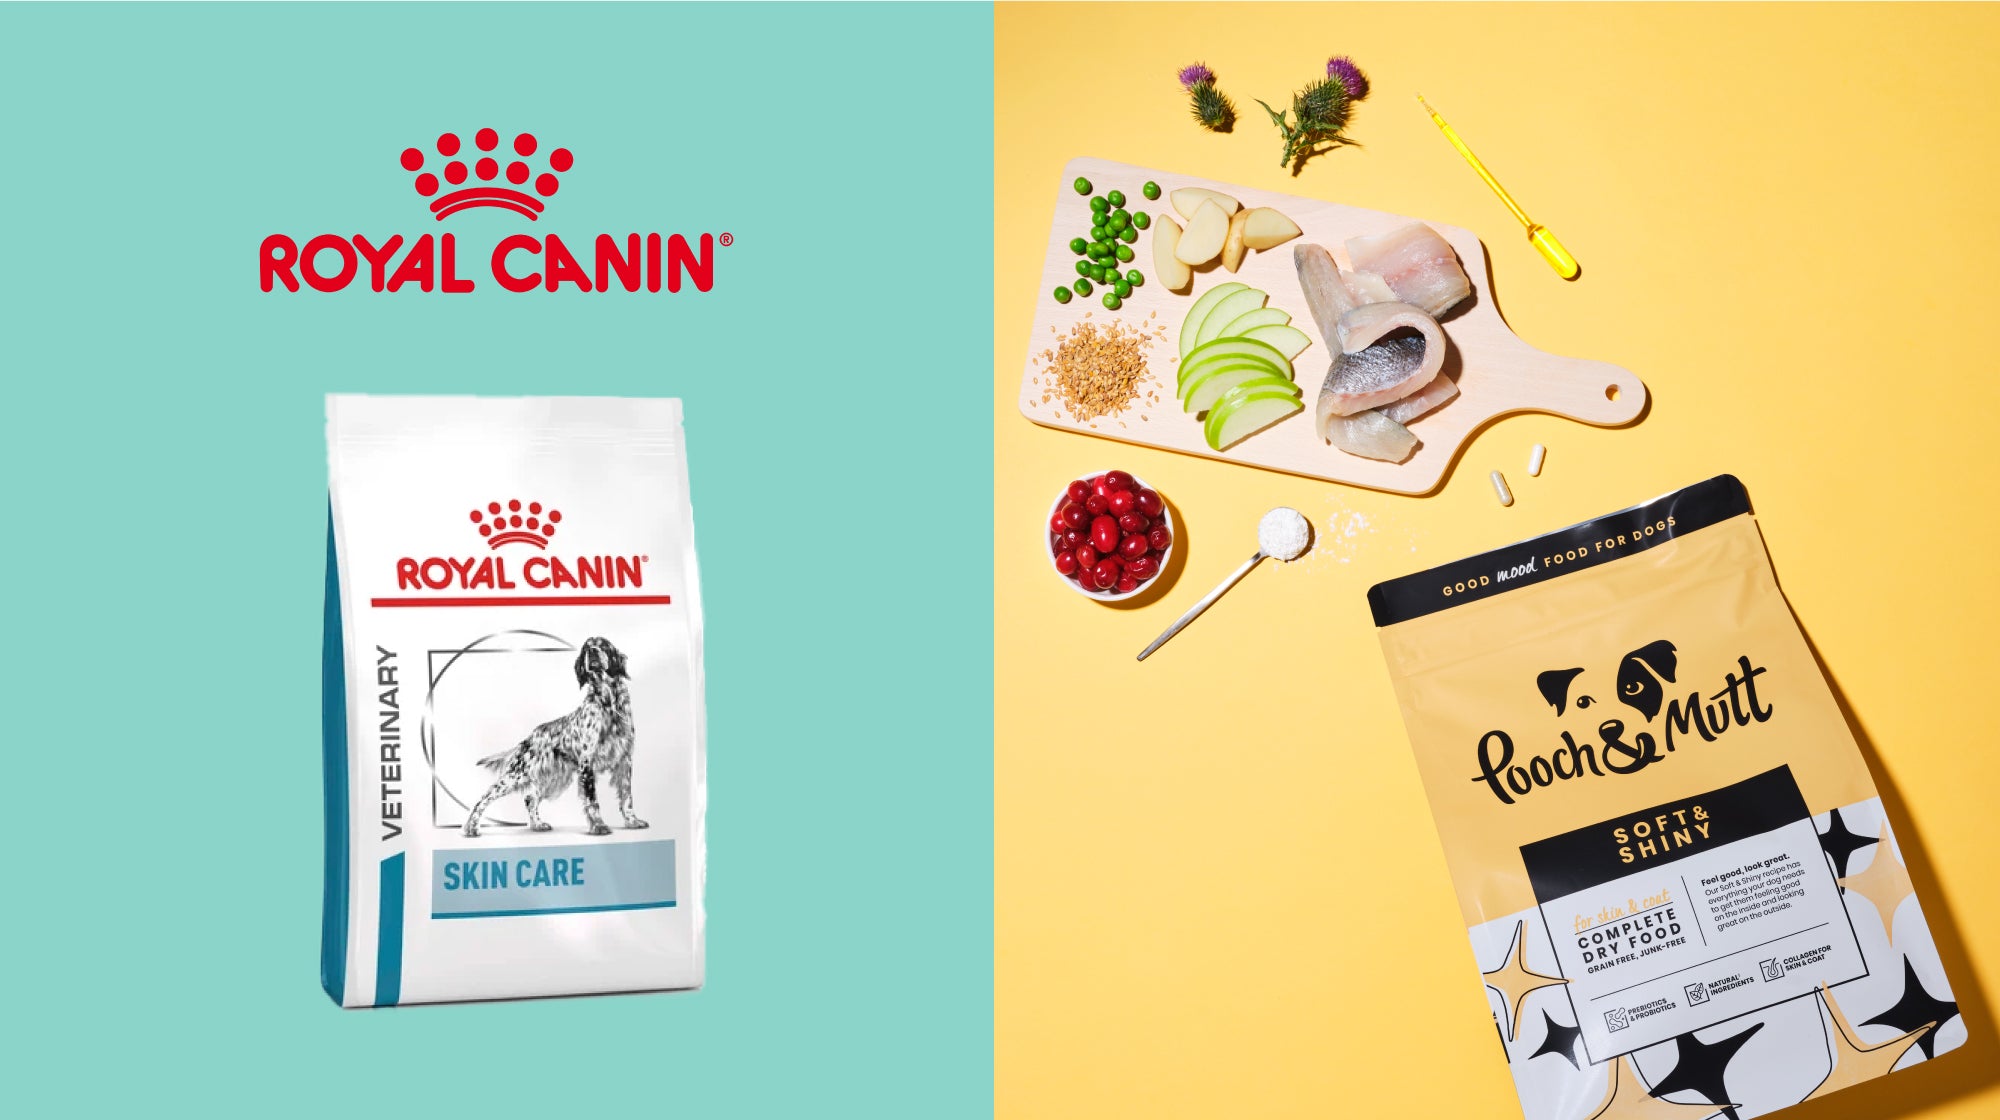 Royal canin skin care food vs pooch and mutt soft and shiny dry food